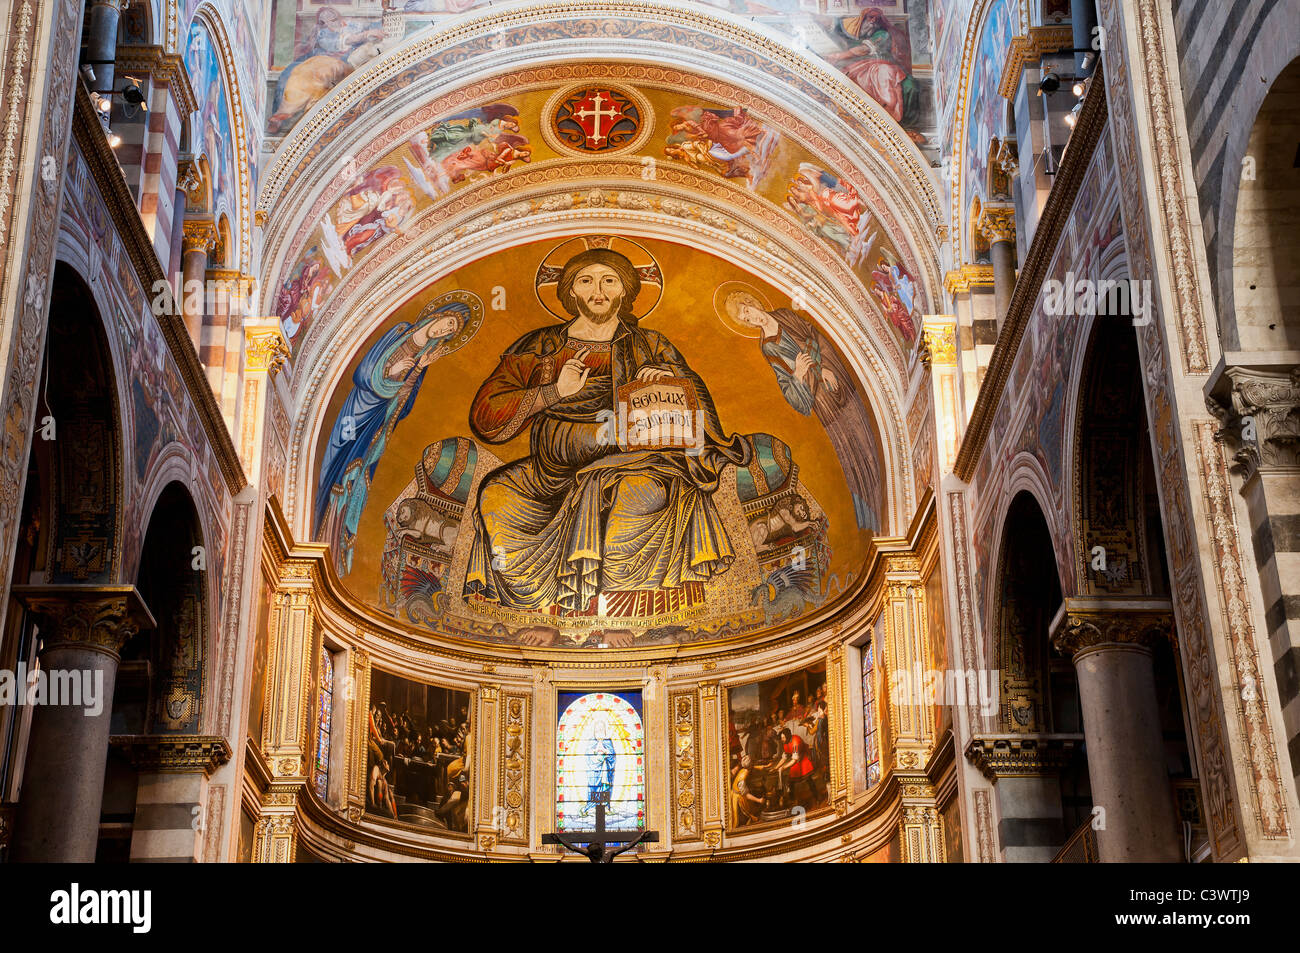 The mosaic of 'Christ in Majesty' located above the altar of Duomo cathedral, Pisa, Tuscany, Italy Stock Photo